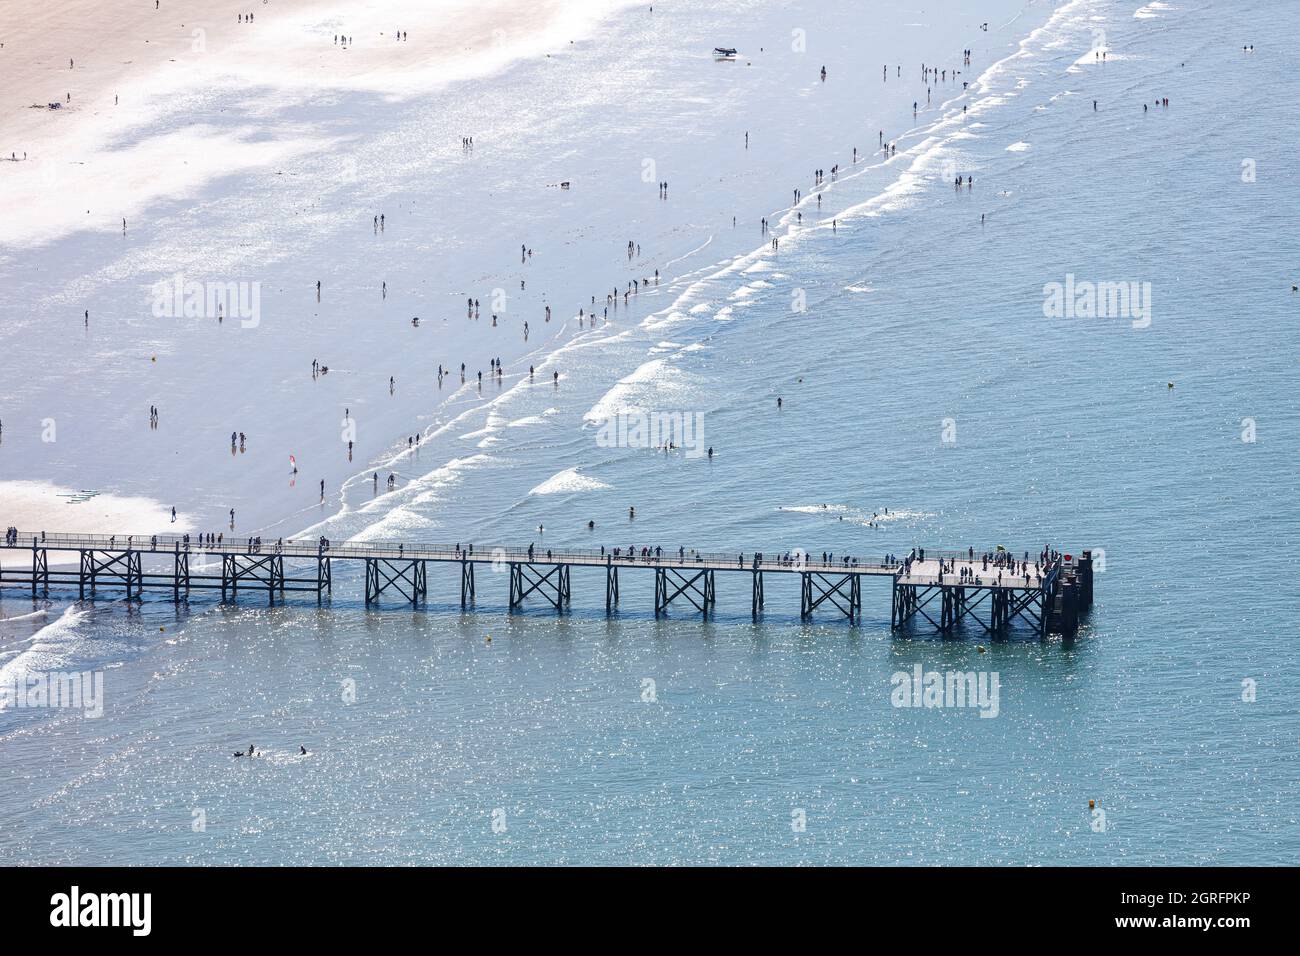 France, Vendee, St Jean de Monts, walkers and bathers on the beach and the jetty (aerial view) Stock Photo